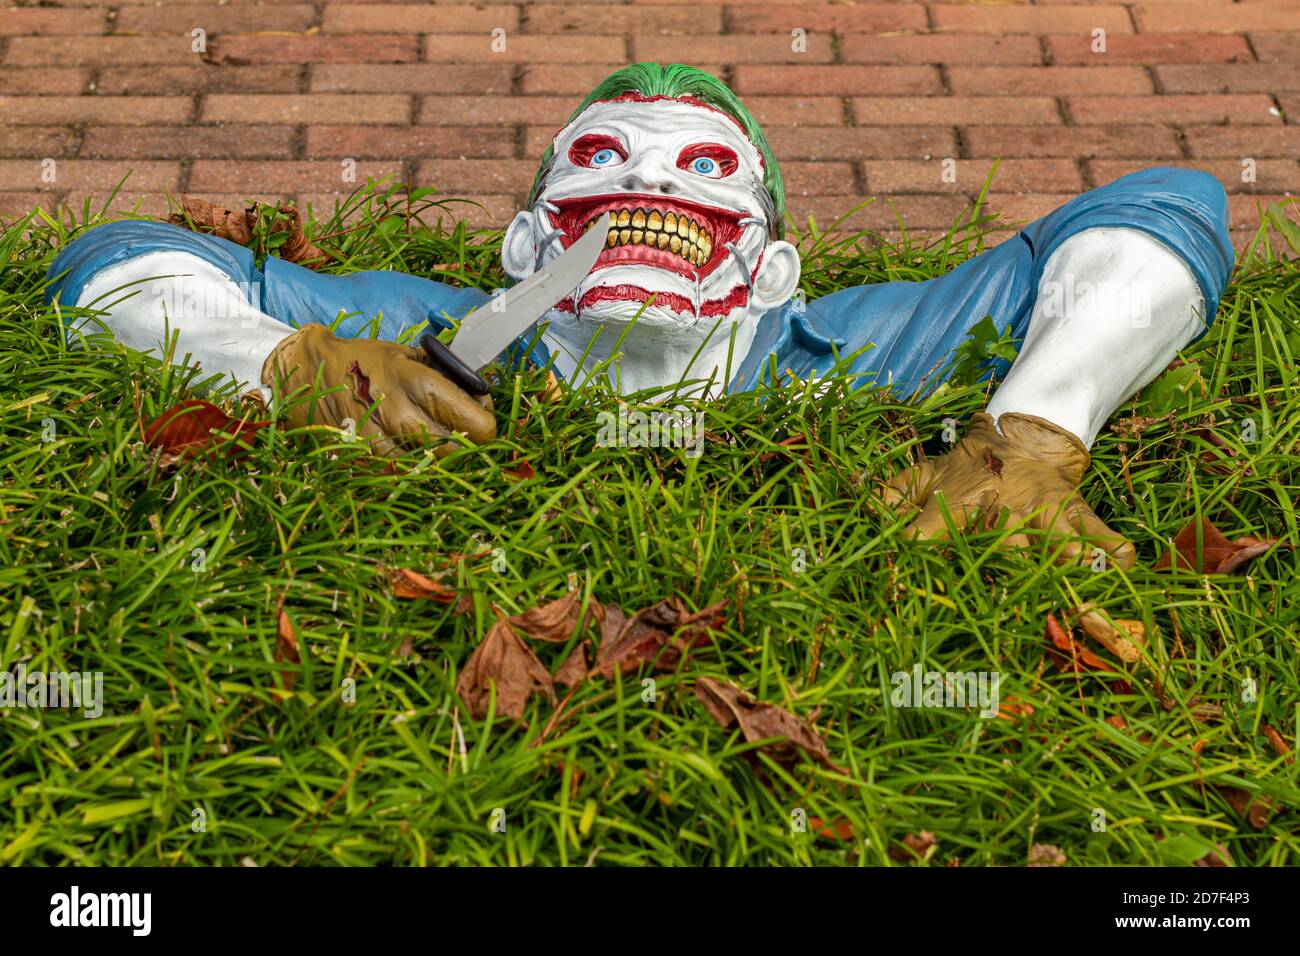 A creepy but original halloween decoration put in the front yard of a house. A plastic model in shape of an undead killer clown that is rising from hi Stock Photo